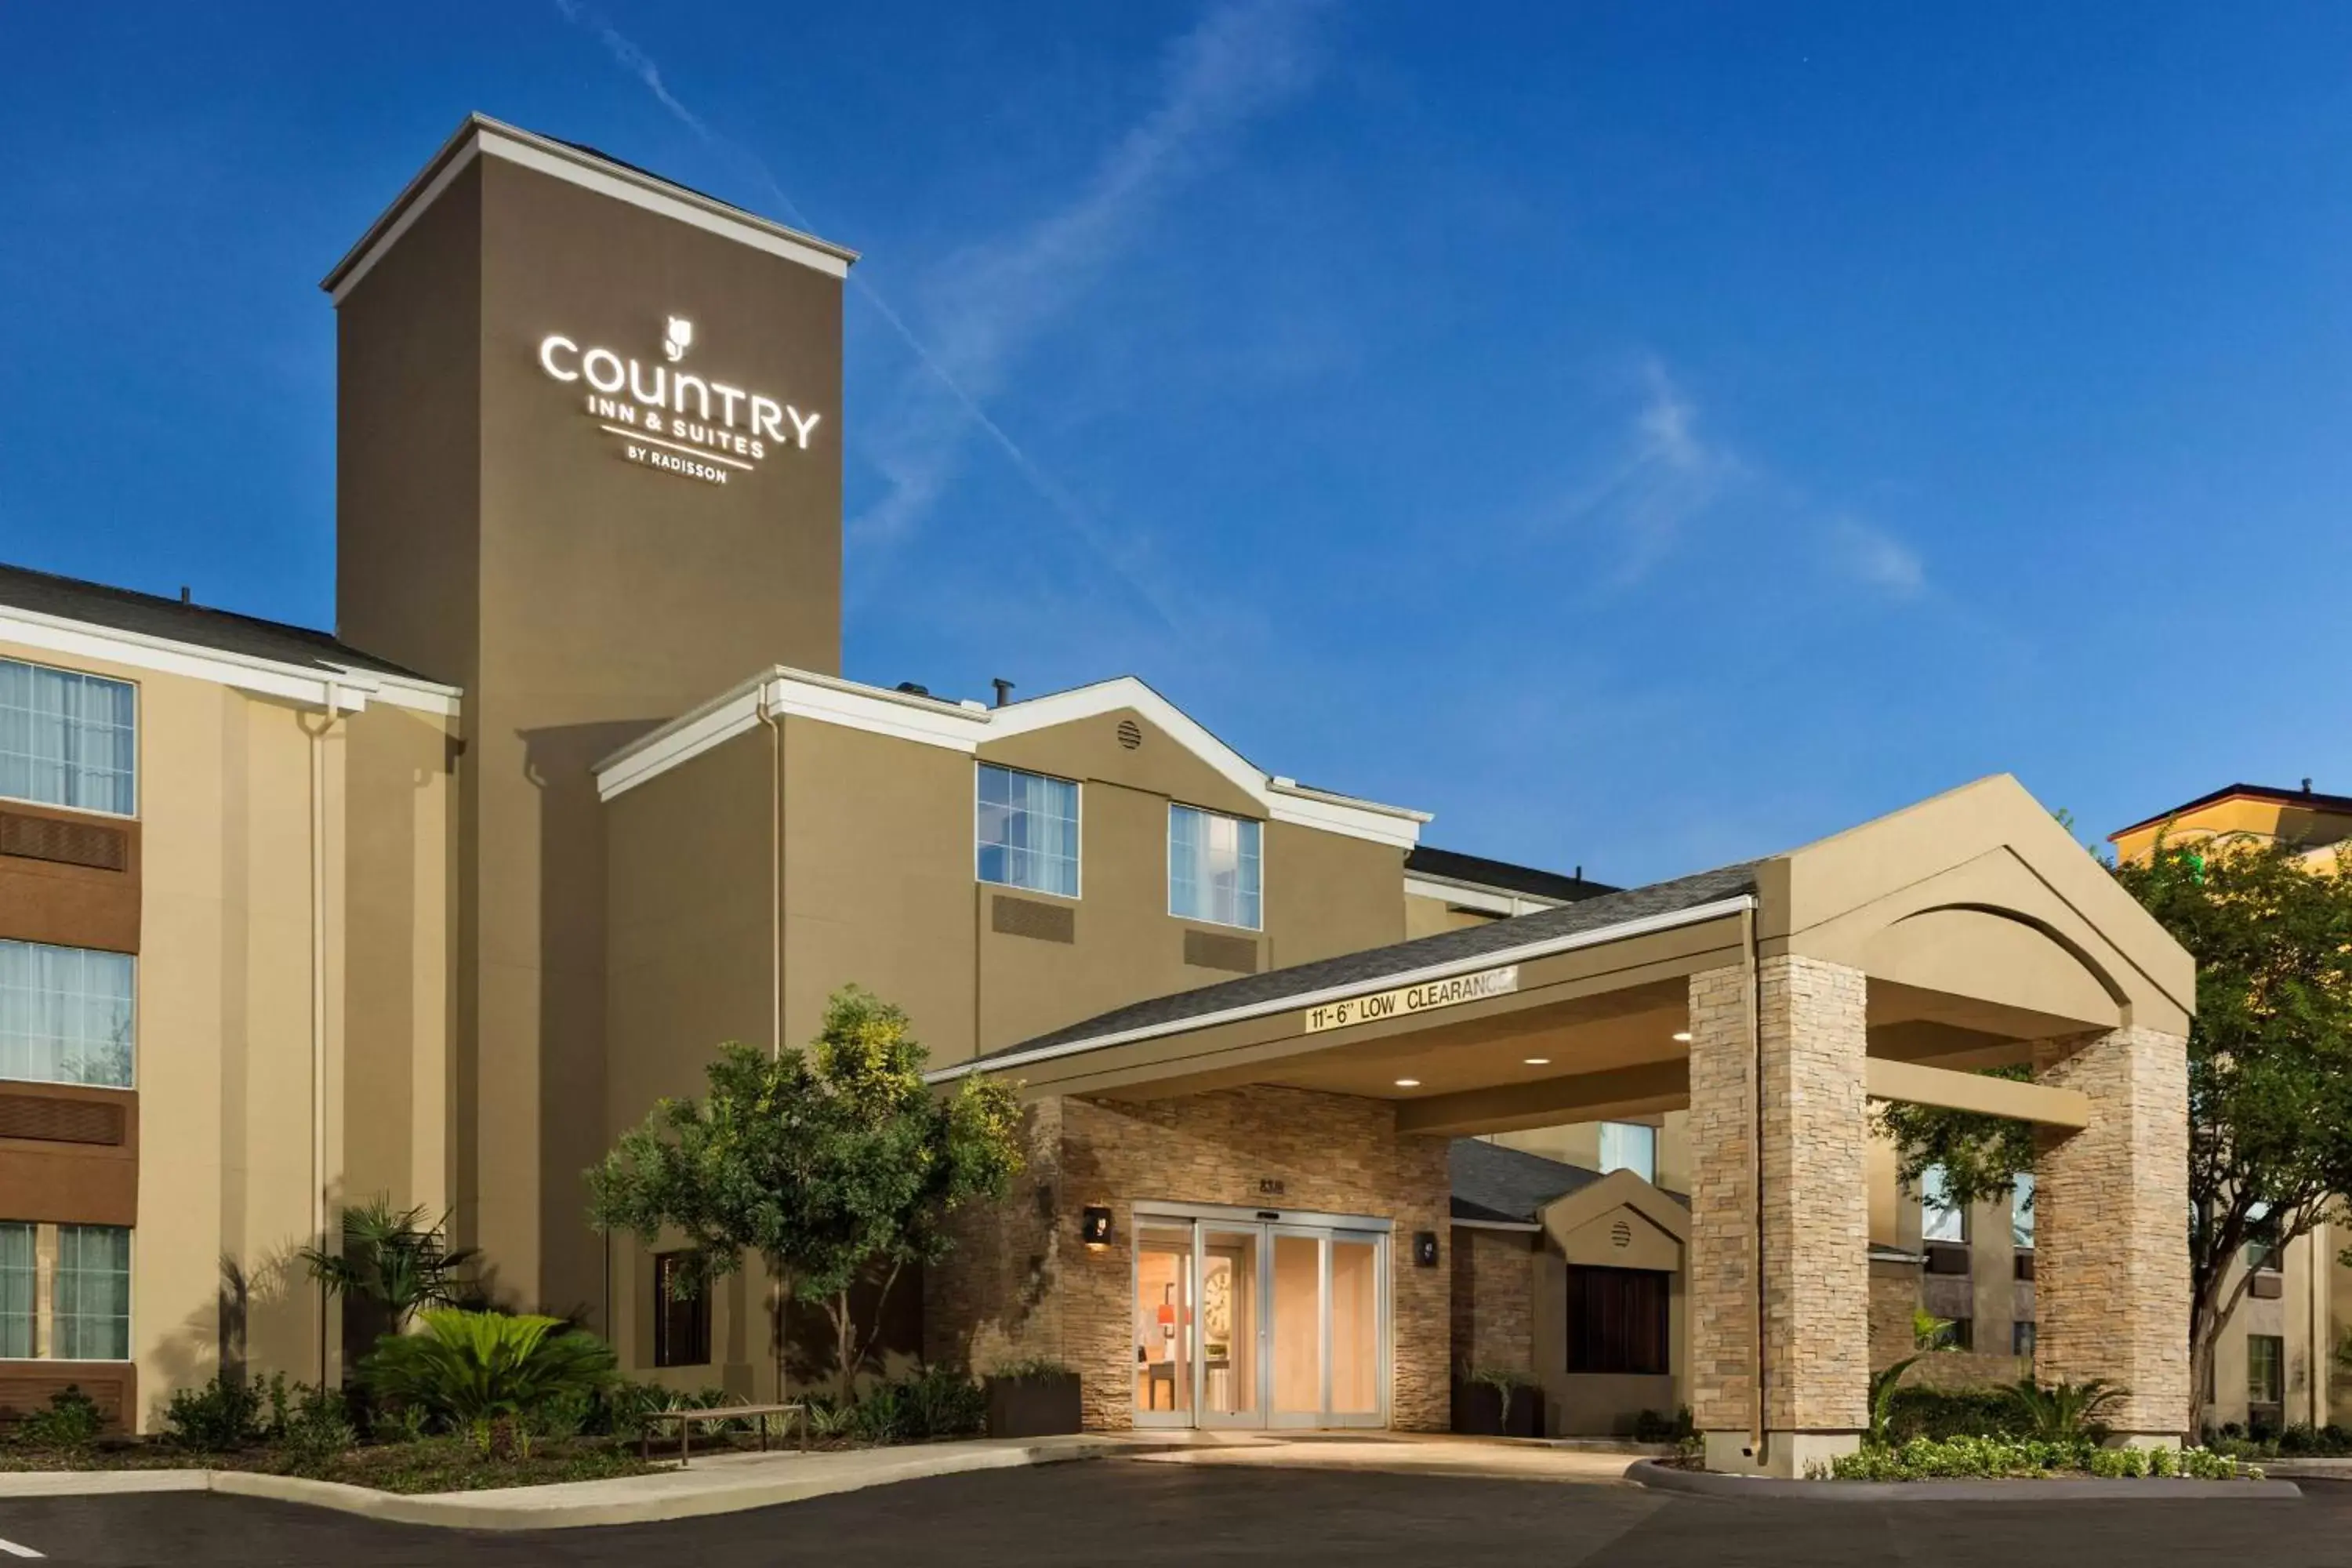 Property building in Country Inn & Suites by Radisson, San Antonio Medical Center, TX